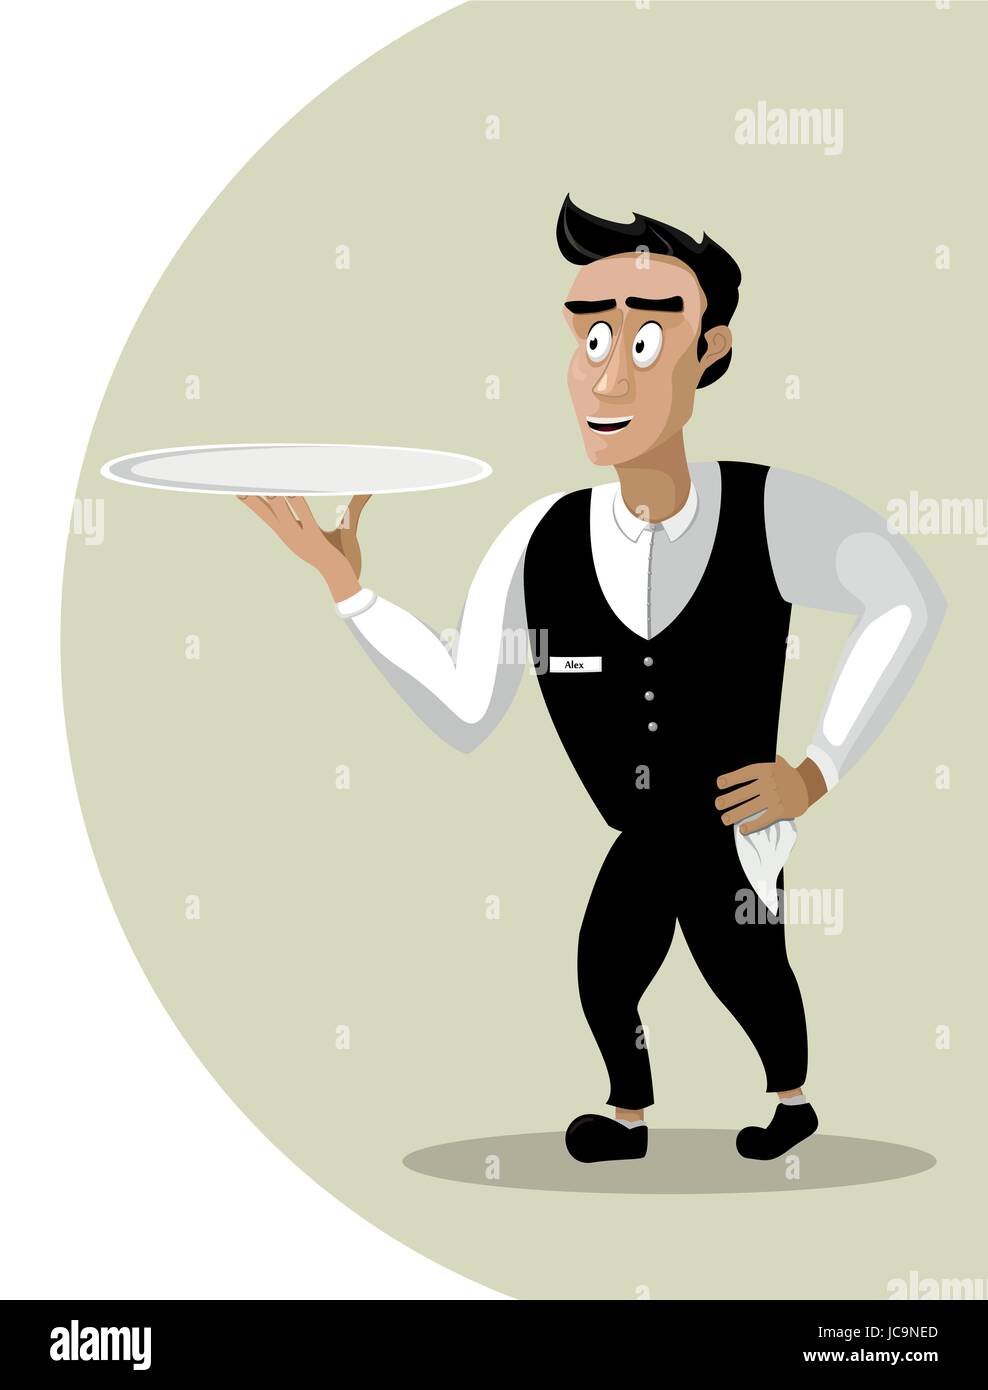 Men male person young waiter steward garcon flunkey flunky cartoon happy smile serving go dish food silver tray portrait. Vector close-up vertical bea Stock Vector